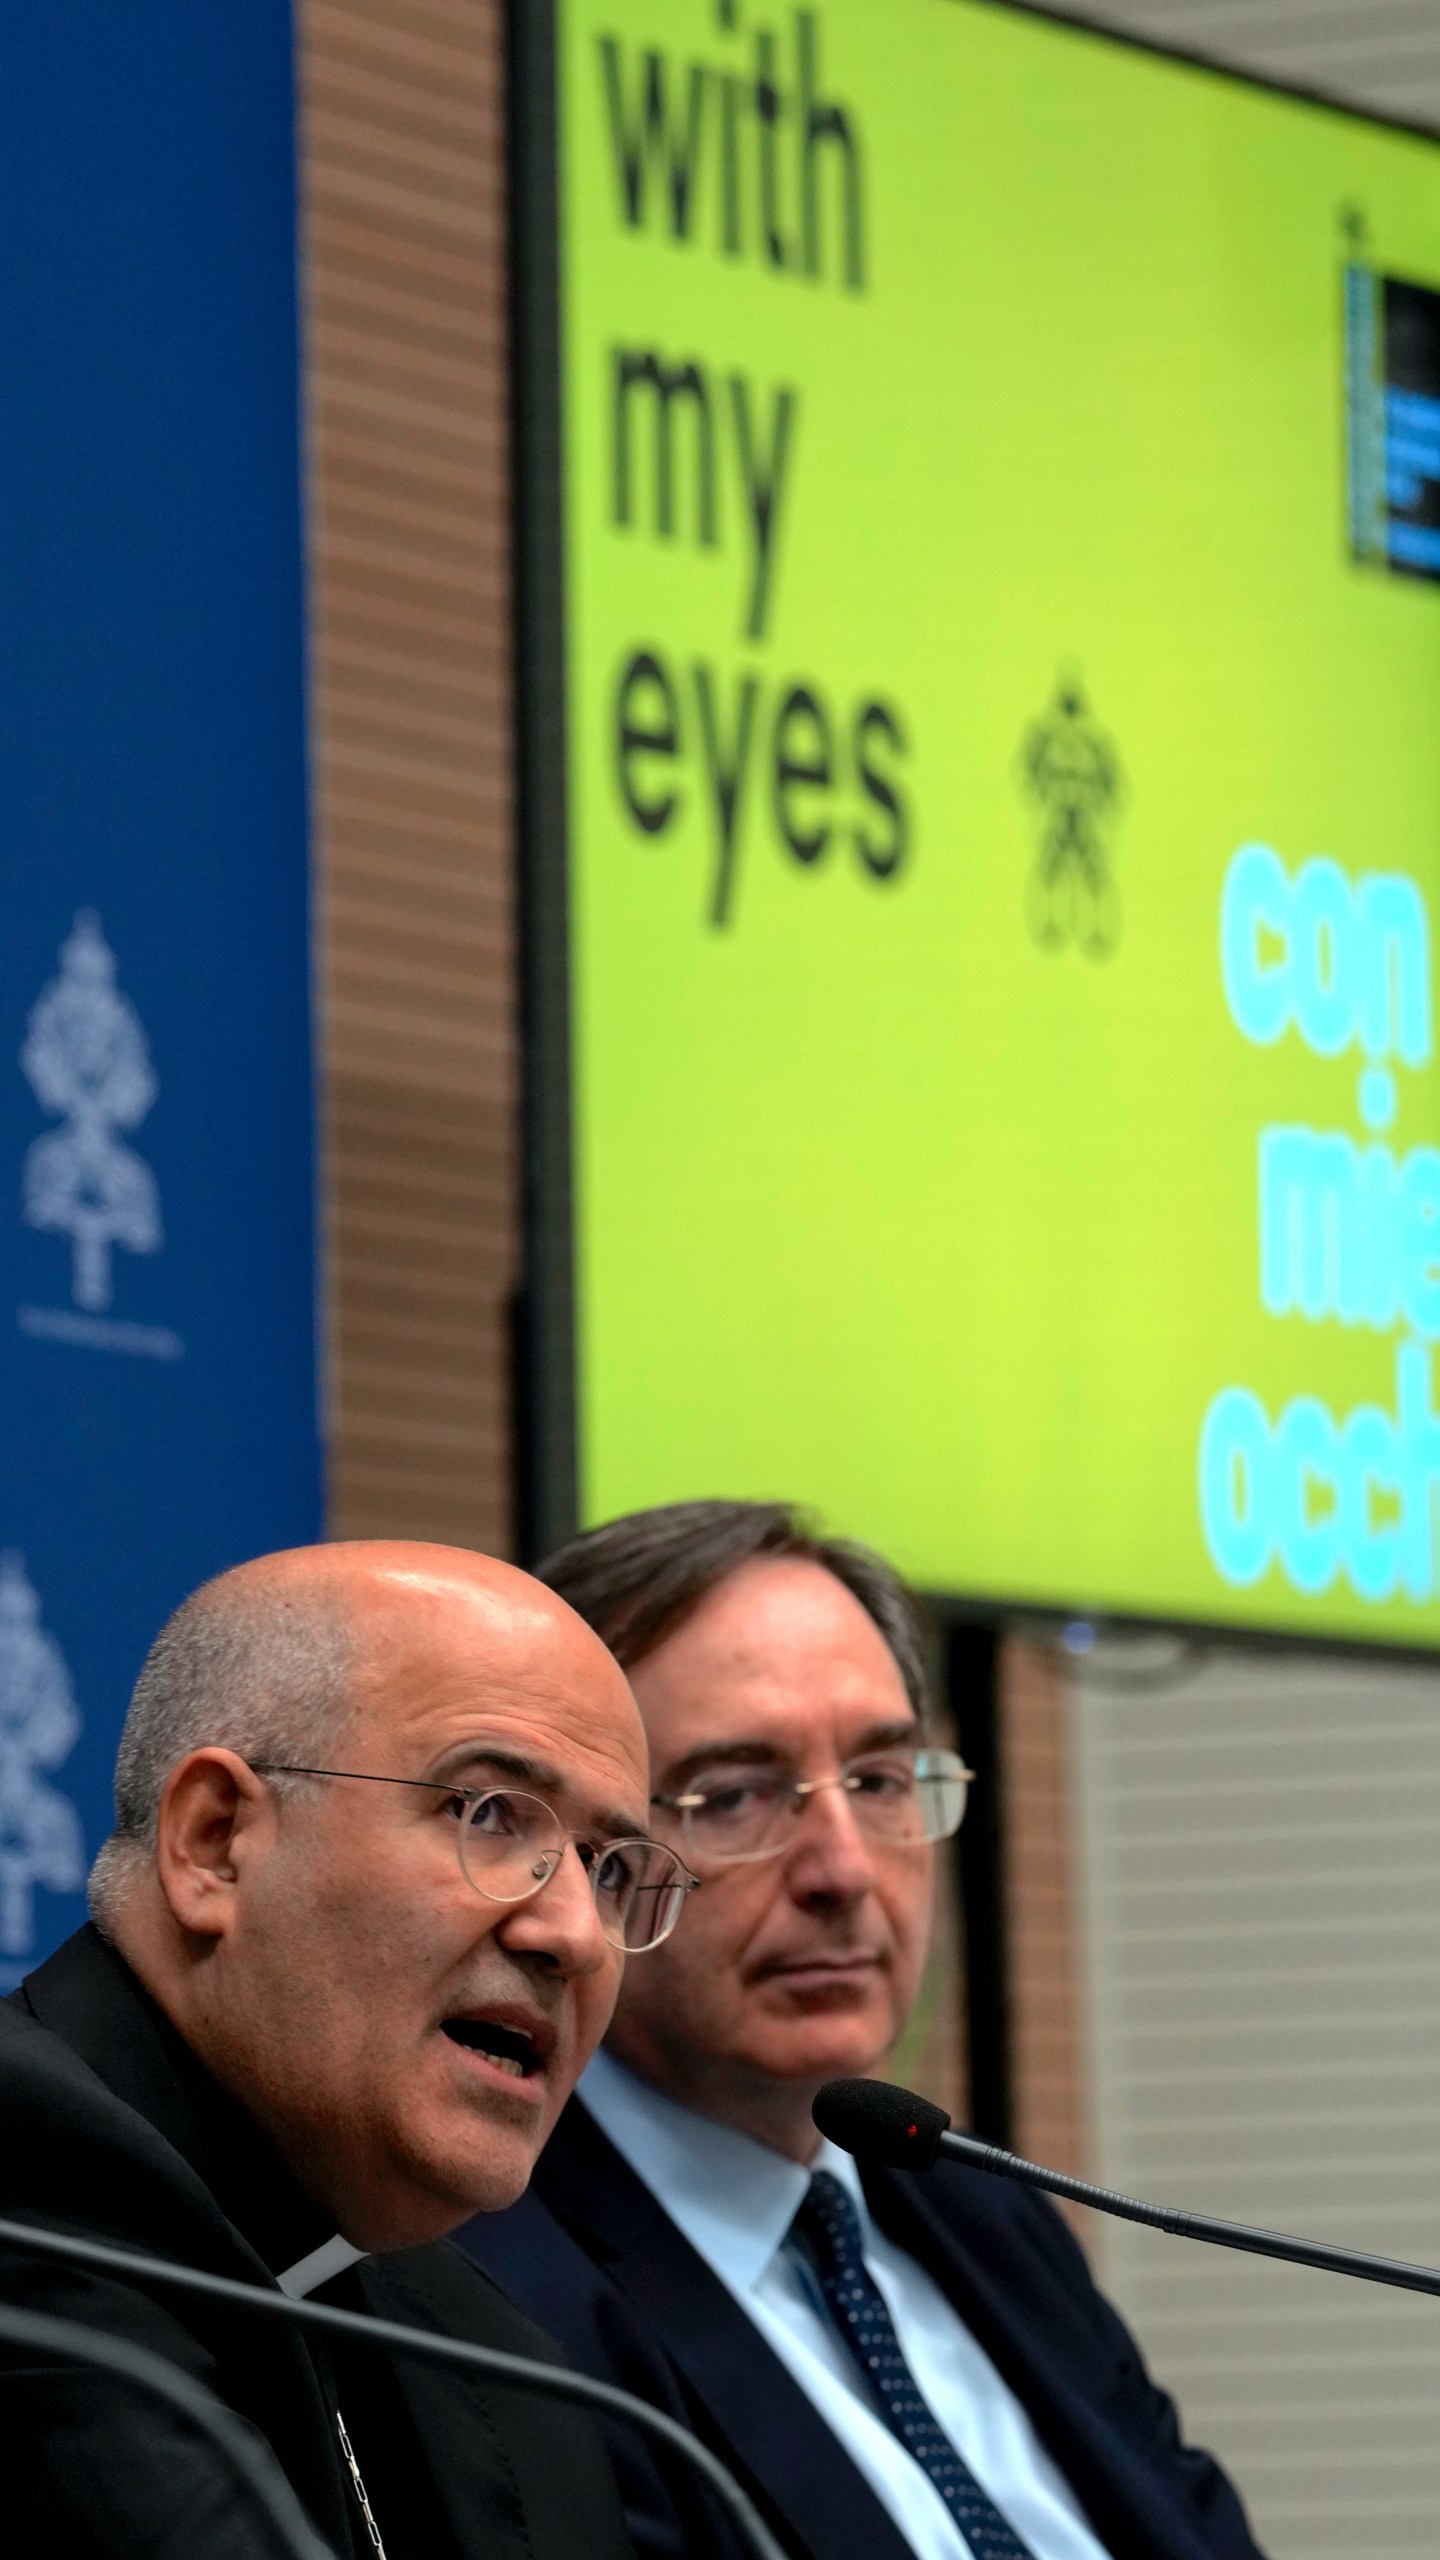 From left, Vatican Prefect of the Dicastery for Culture and Education, Card. José Tolentino de Mendonça and Giovanni Russo, head of the Italian Prison Administration attend a press conference at The Vatican, Monday, March 11, 2024, to present "With my Eyes", the Holy See pavillion for the 60th edition of the Venice Biennale of Arts opening on April 20th, 2024. (AP Photo/Domenico Stinellis)